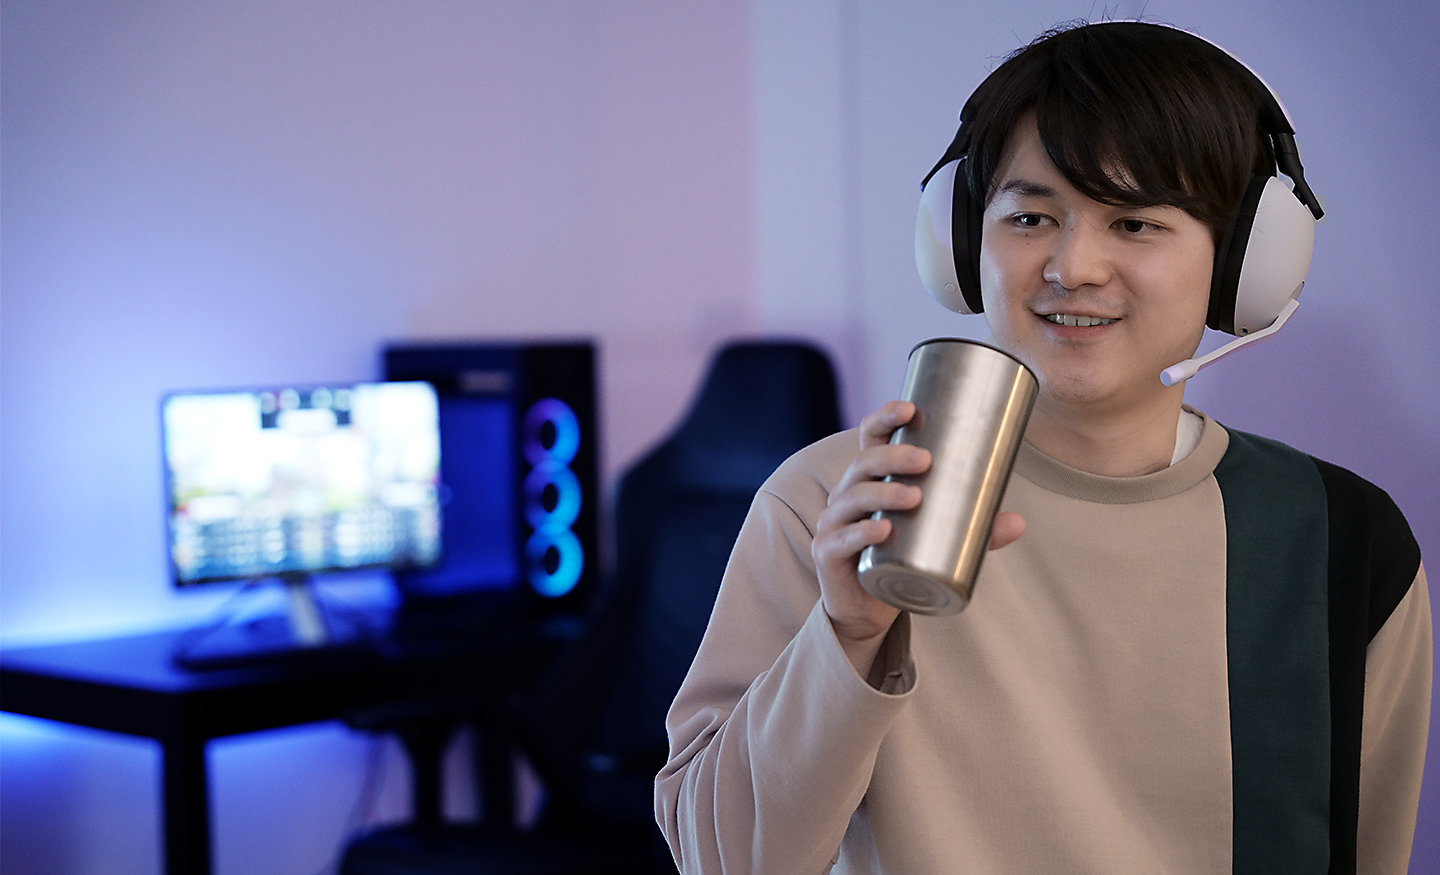 Image of a man drinking from a metal cup whilst wearing an INZONE H9 gaming headset with a PC in the background